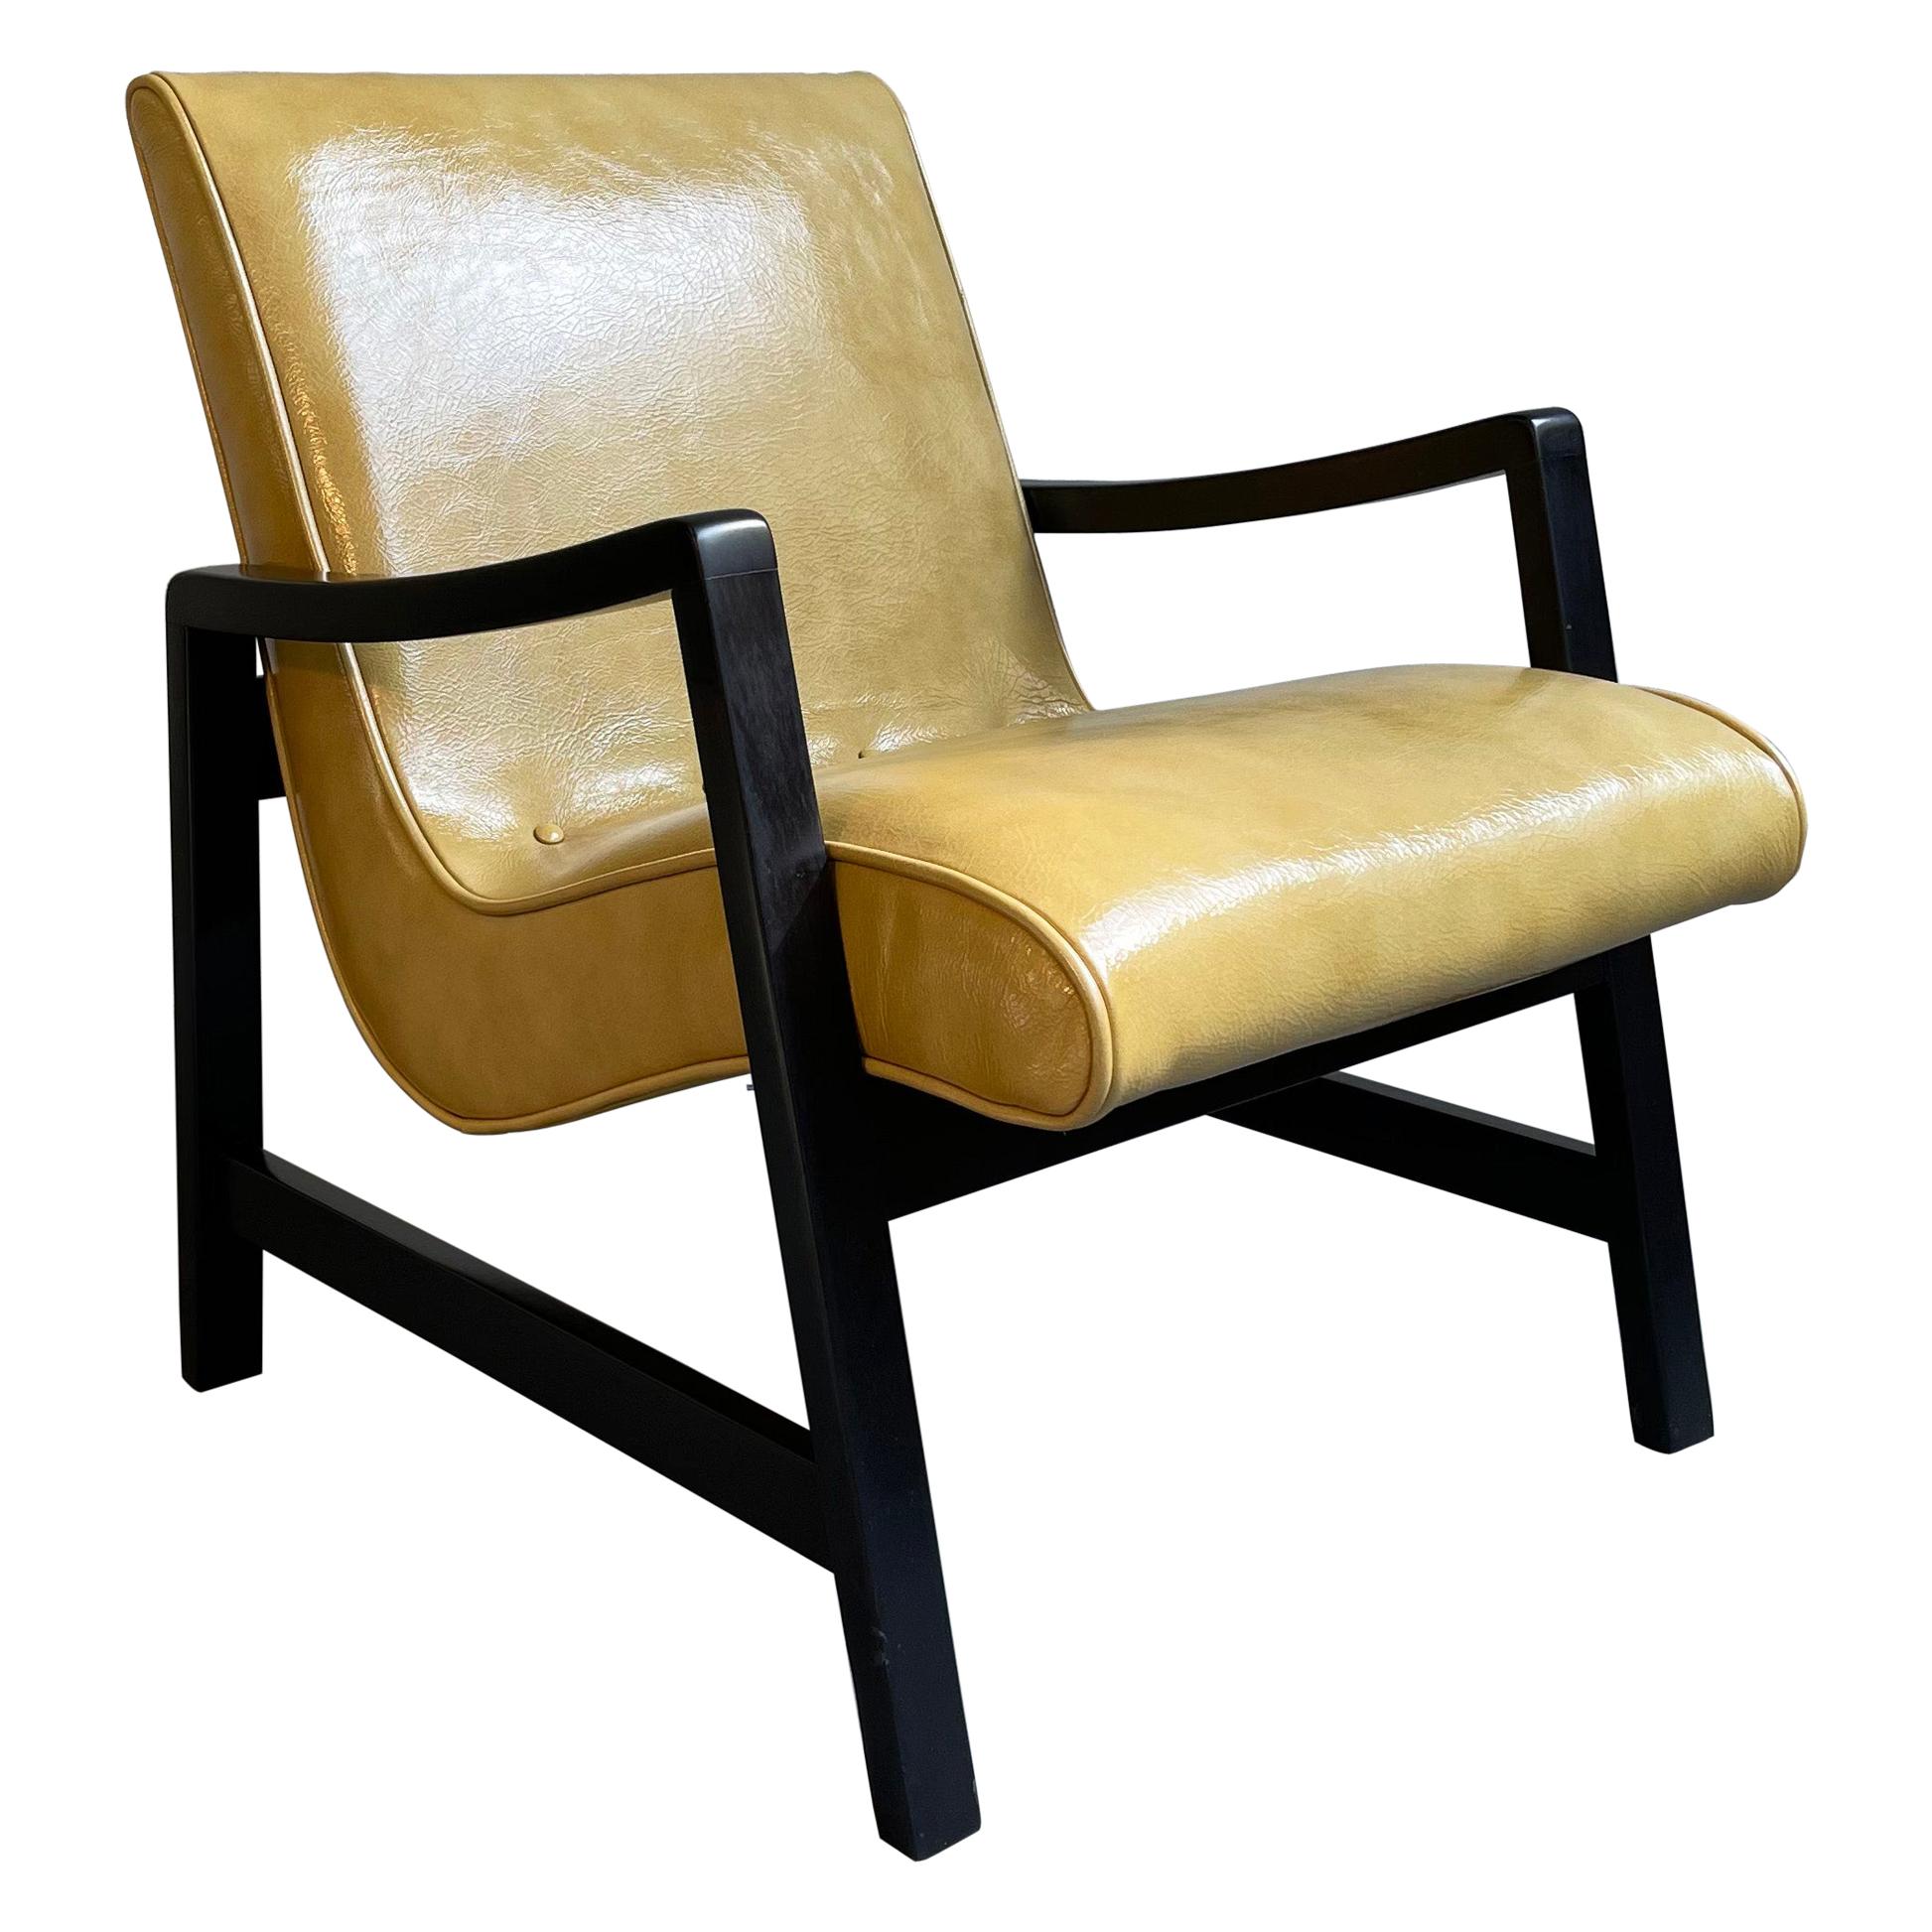 Mid-Century Modern Scoop Leather Lounge Chair By Jens Risom For Knoll